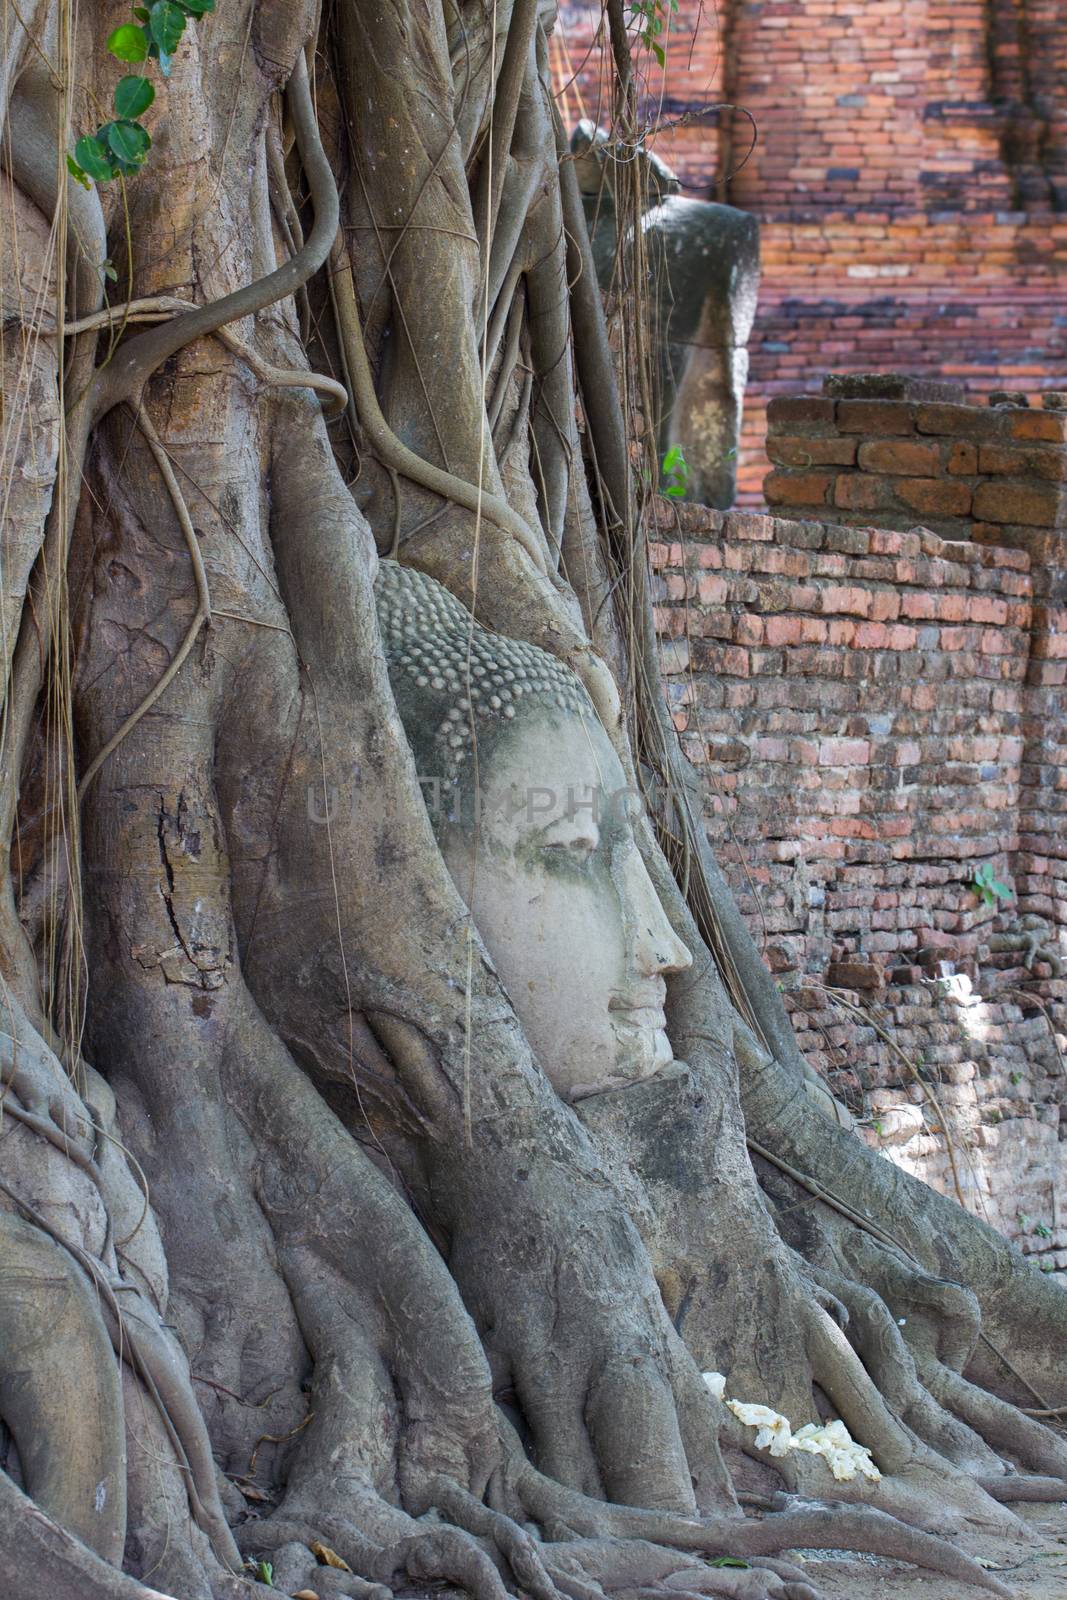 The Head of sandstone Buddha in tree roots at Wat Mahathat, Ayut by a3701027